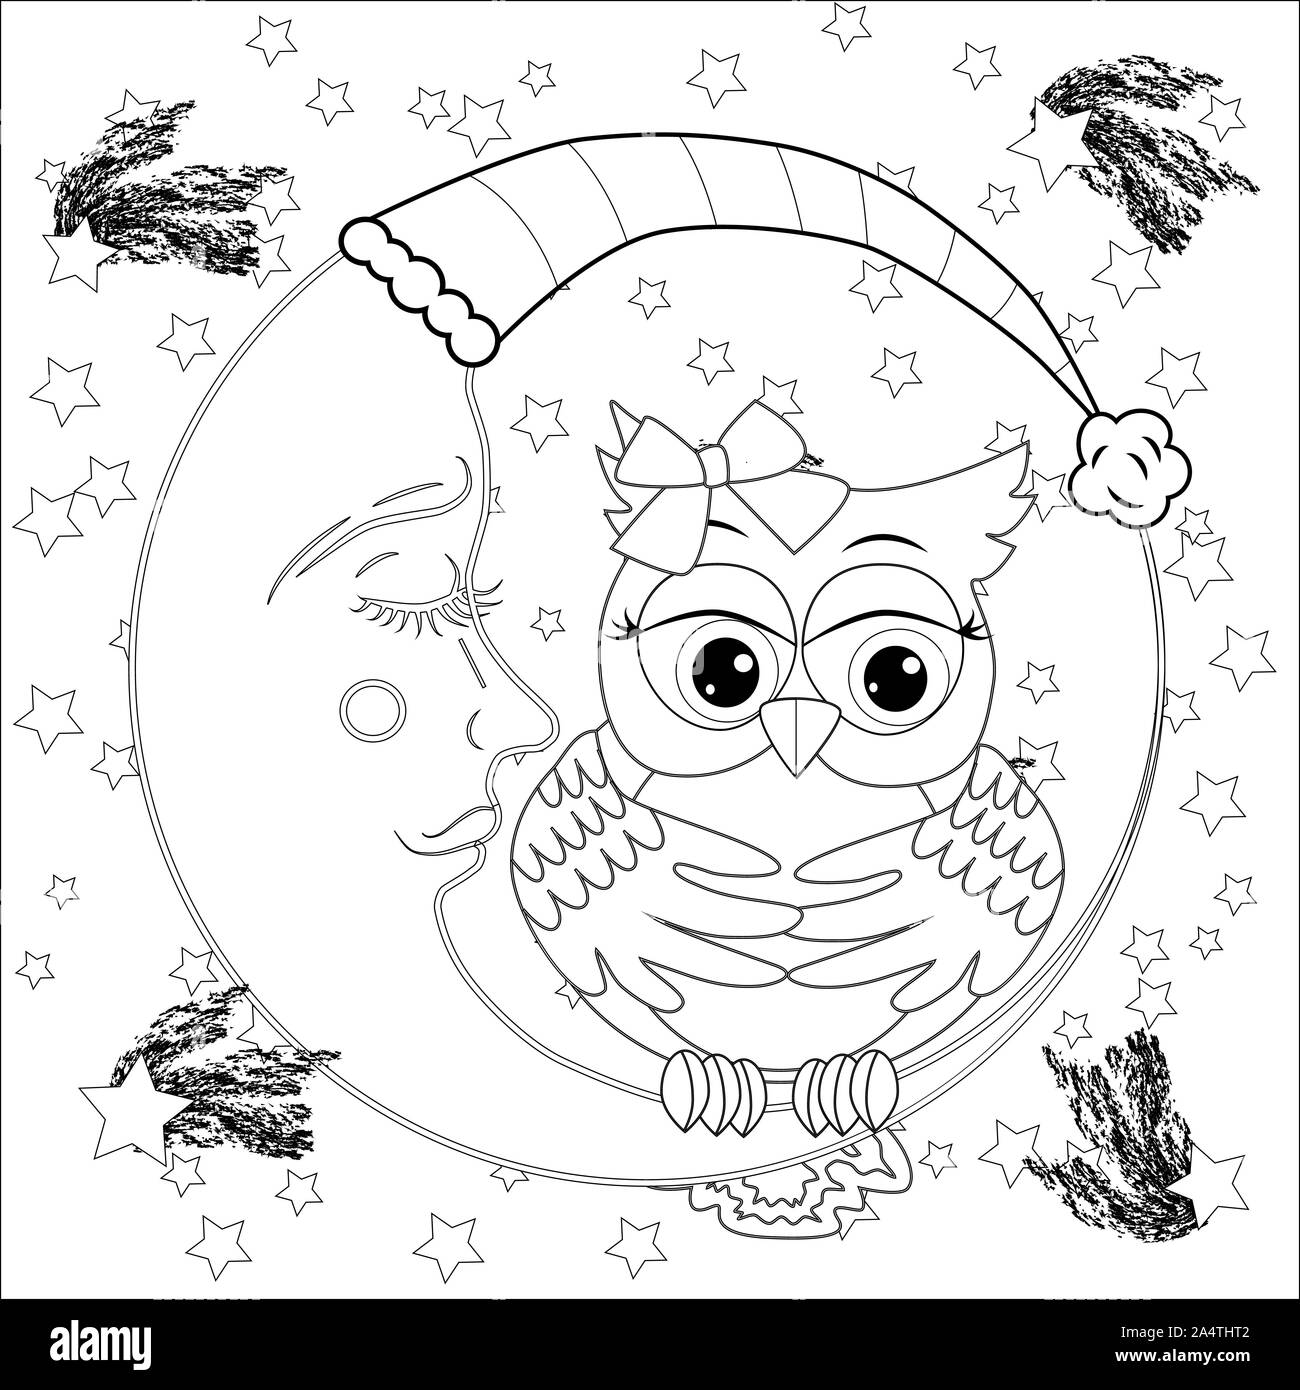 Cute owl on half moon with stars Adult anti stress coloring book or tattoo  boho style Stock Photo  Alamy